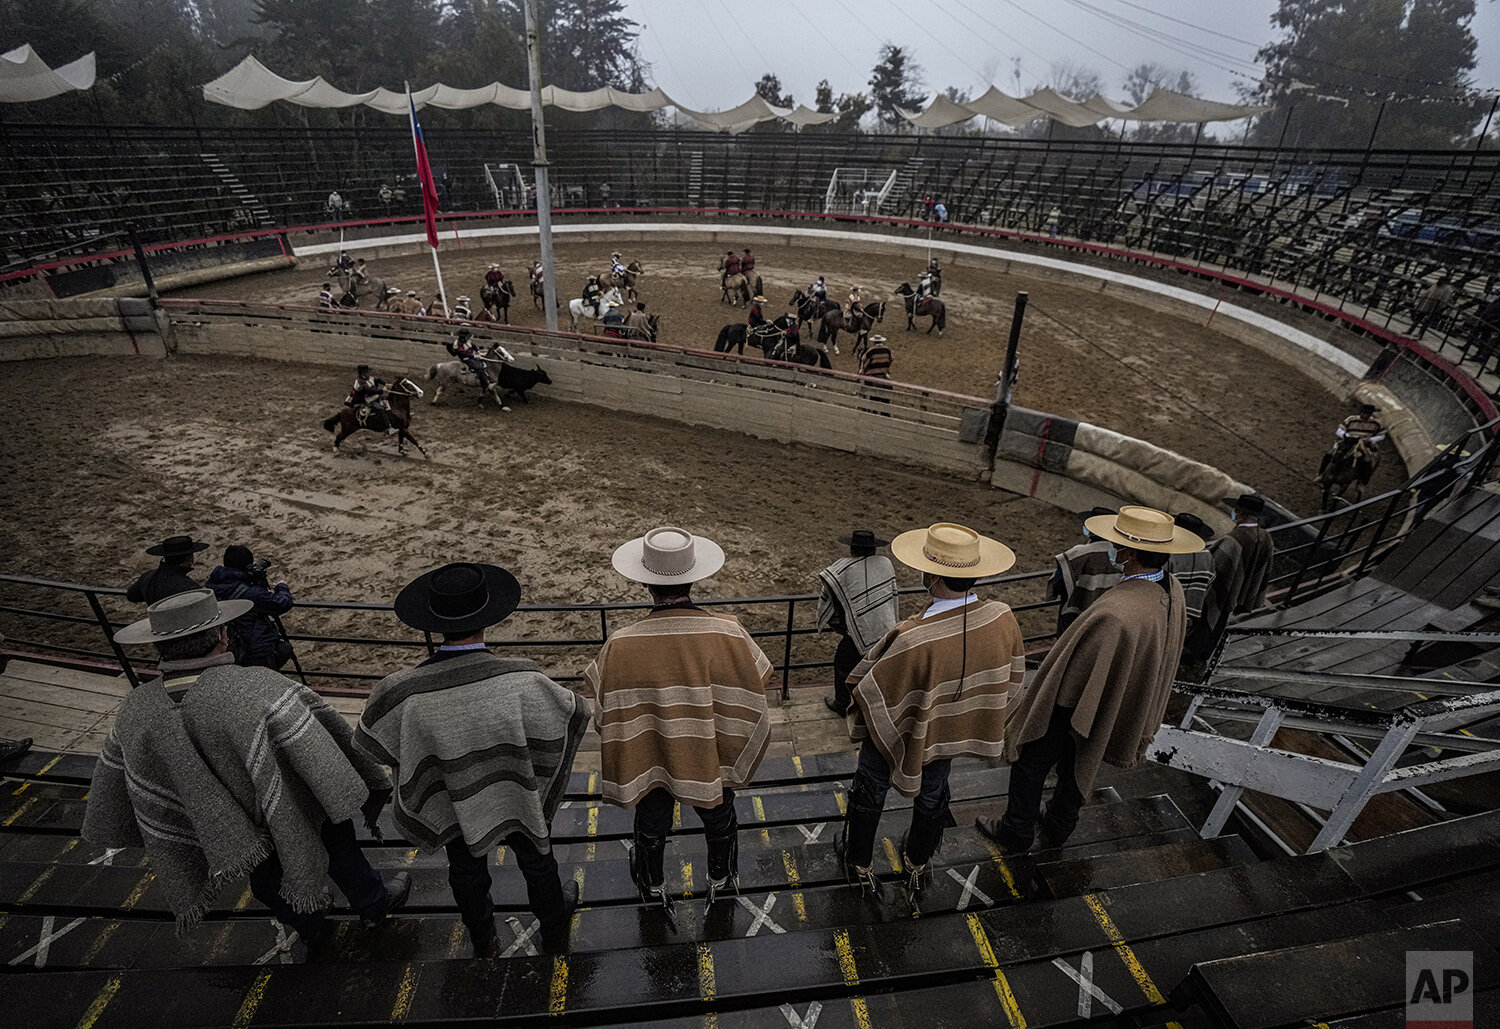 A Rodeo During a Pandemic